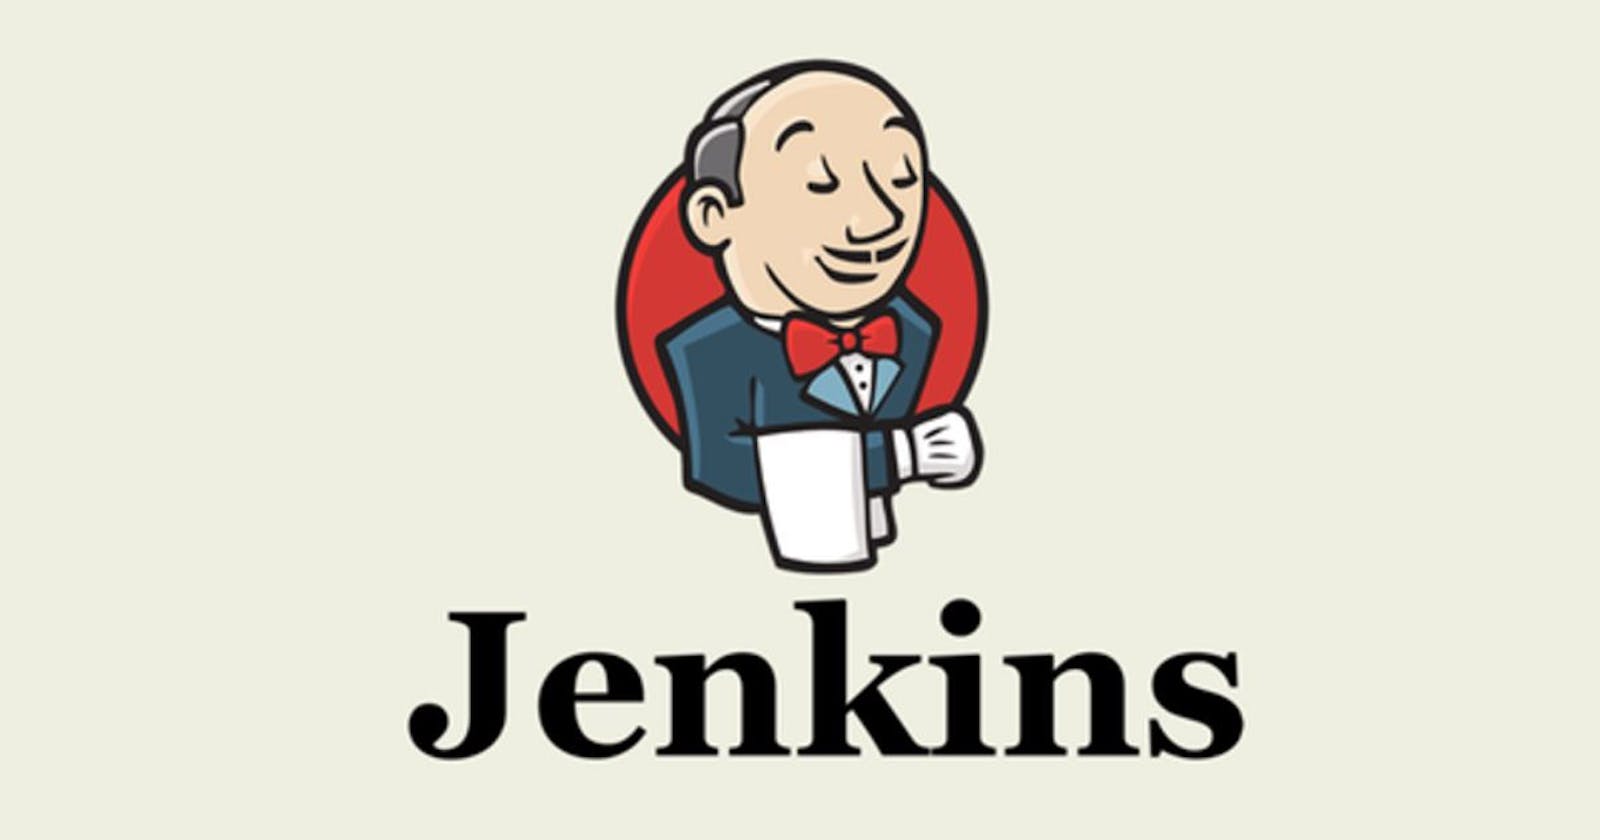 What is Jenkins ?